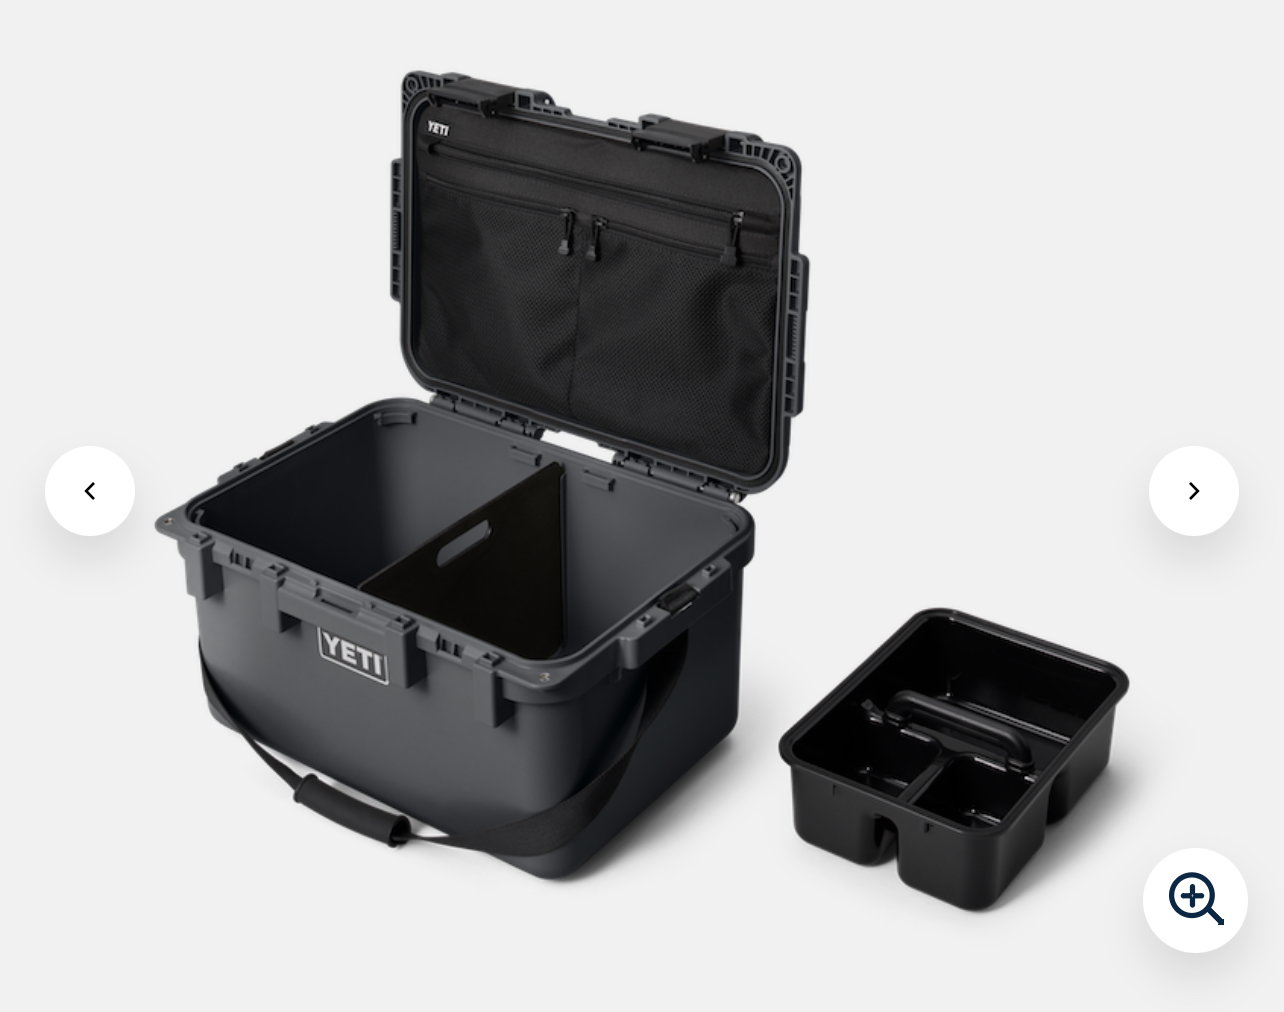 YETI - JUST LAUNCHED: the all-new GoBox Collection.